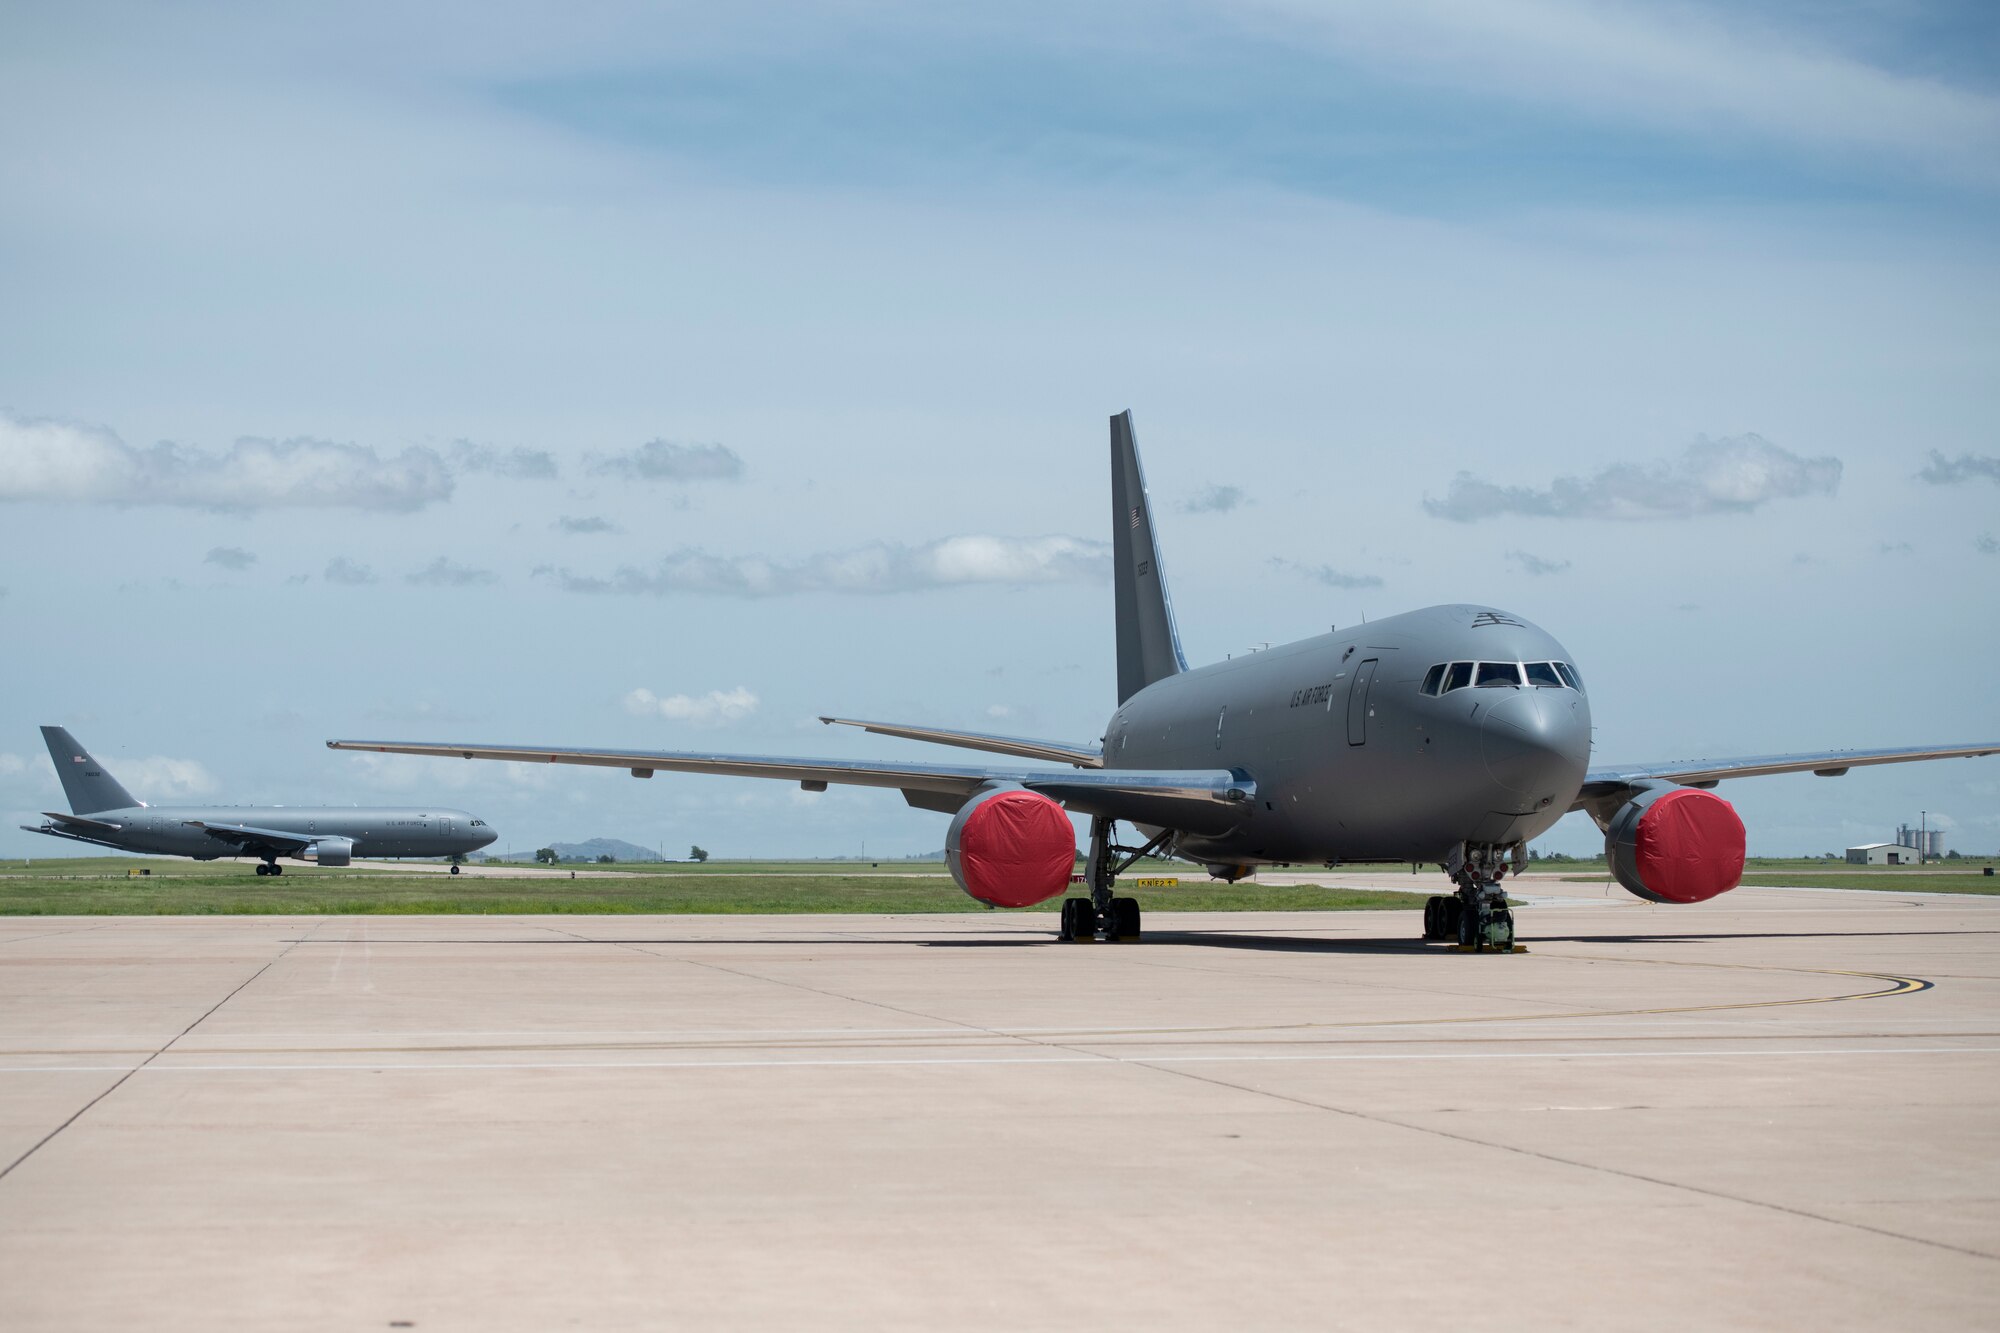 A fourth KC-46 Pegasus lands on the flight line, May 18, 2019, at Altus Air Force Base, Okla. The KC-46 is a military aerial refueling and transport aircraft designed to replace the current KC-135 Stratotanker. (U.S. Air Force photo by Airman 1st Class Breanna Klemm)